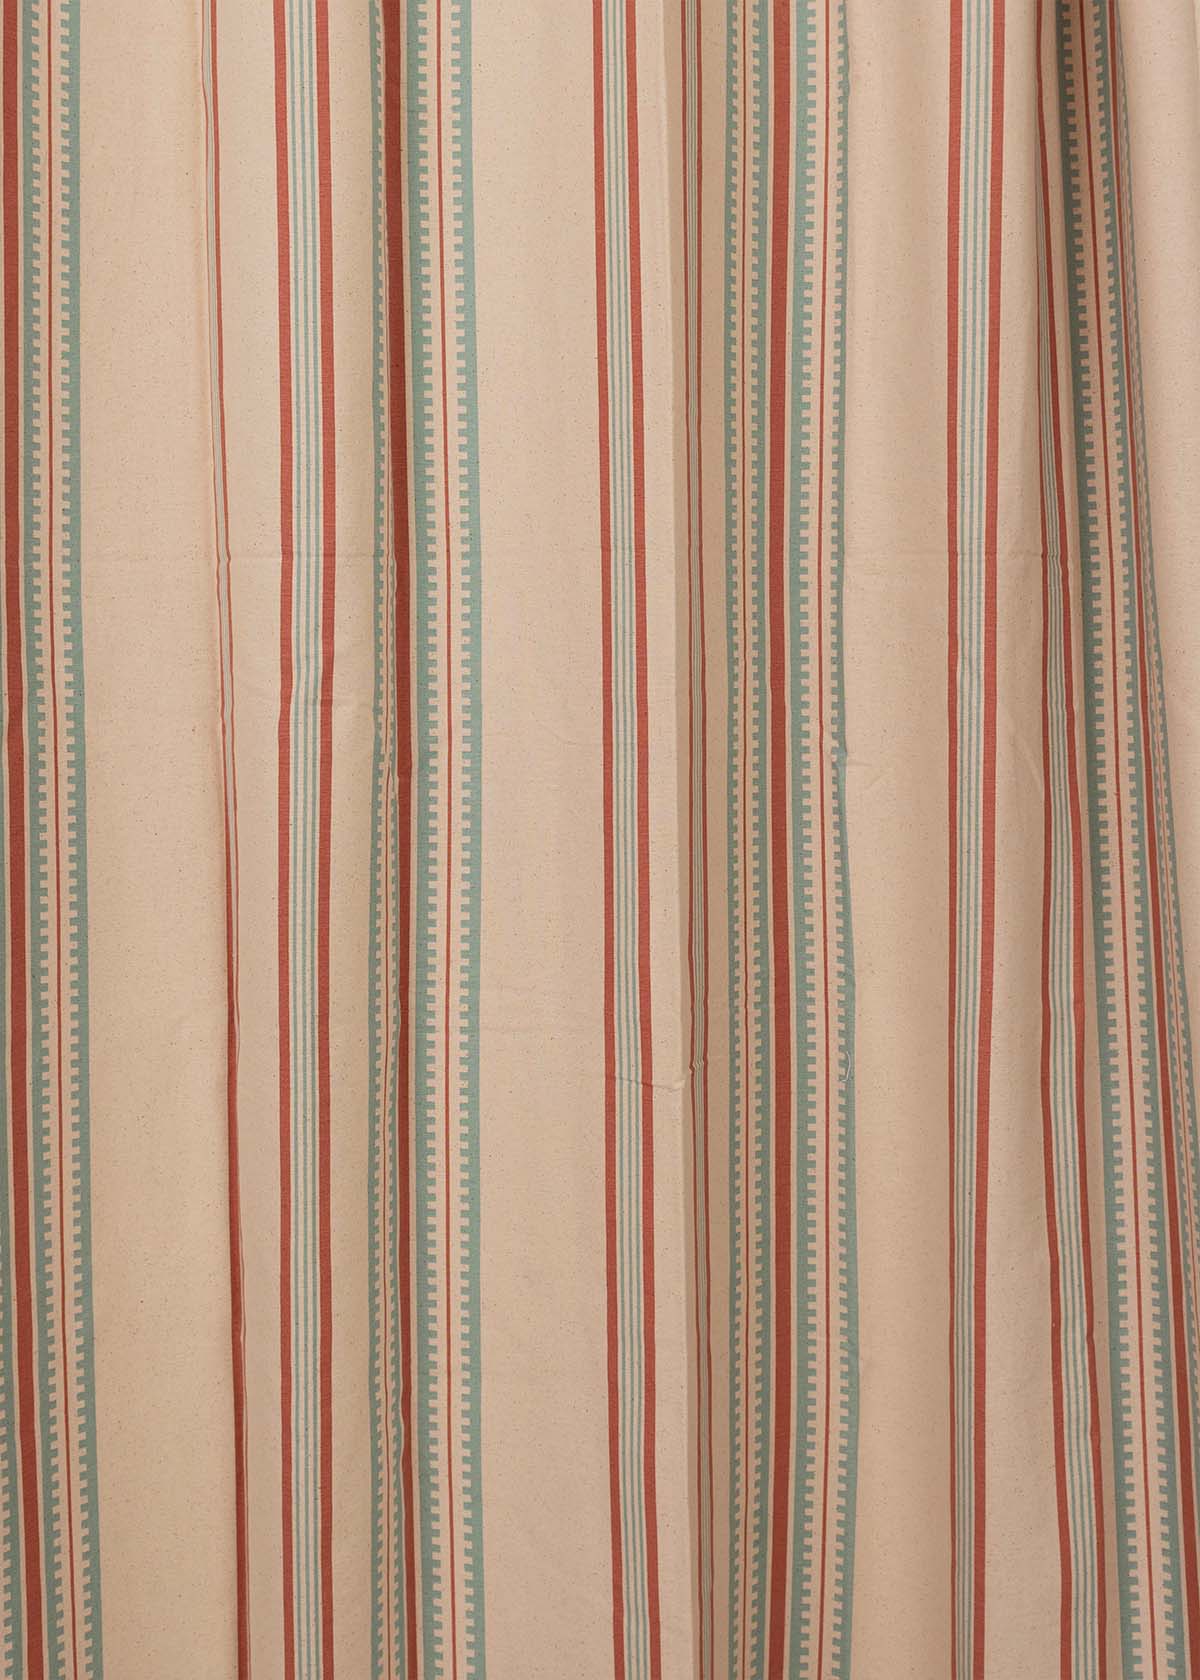 Roman Stripes 100% cotton geometric curtain for bed room - Room darkening - Multicolor - Pack of 1